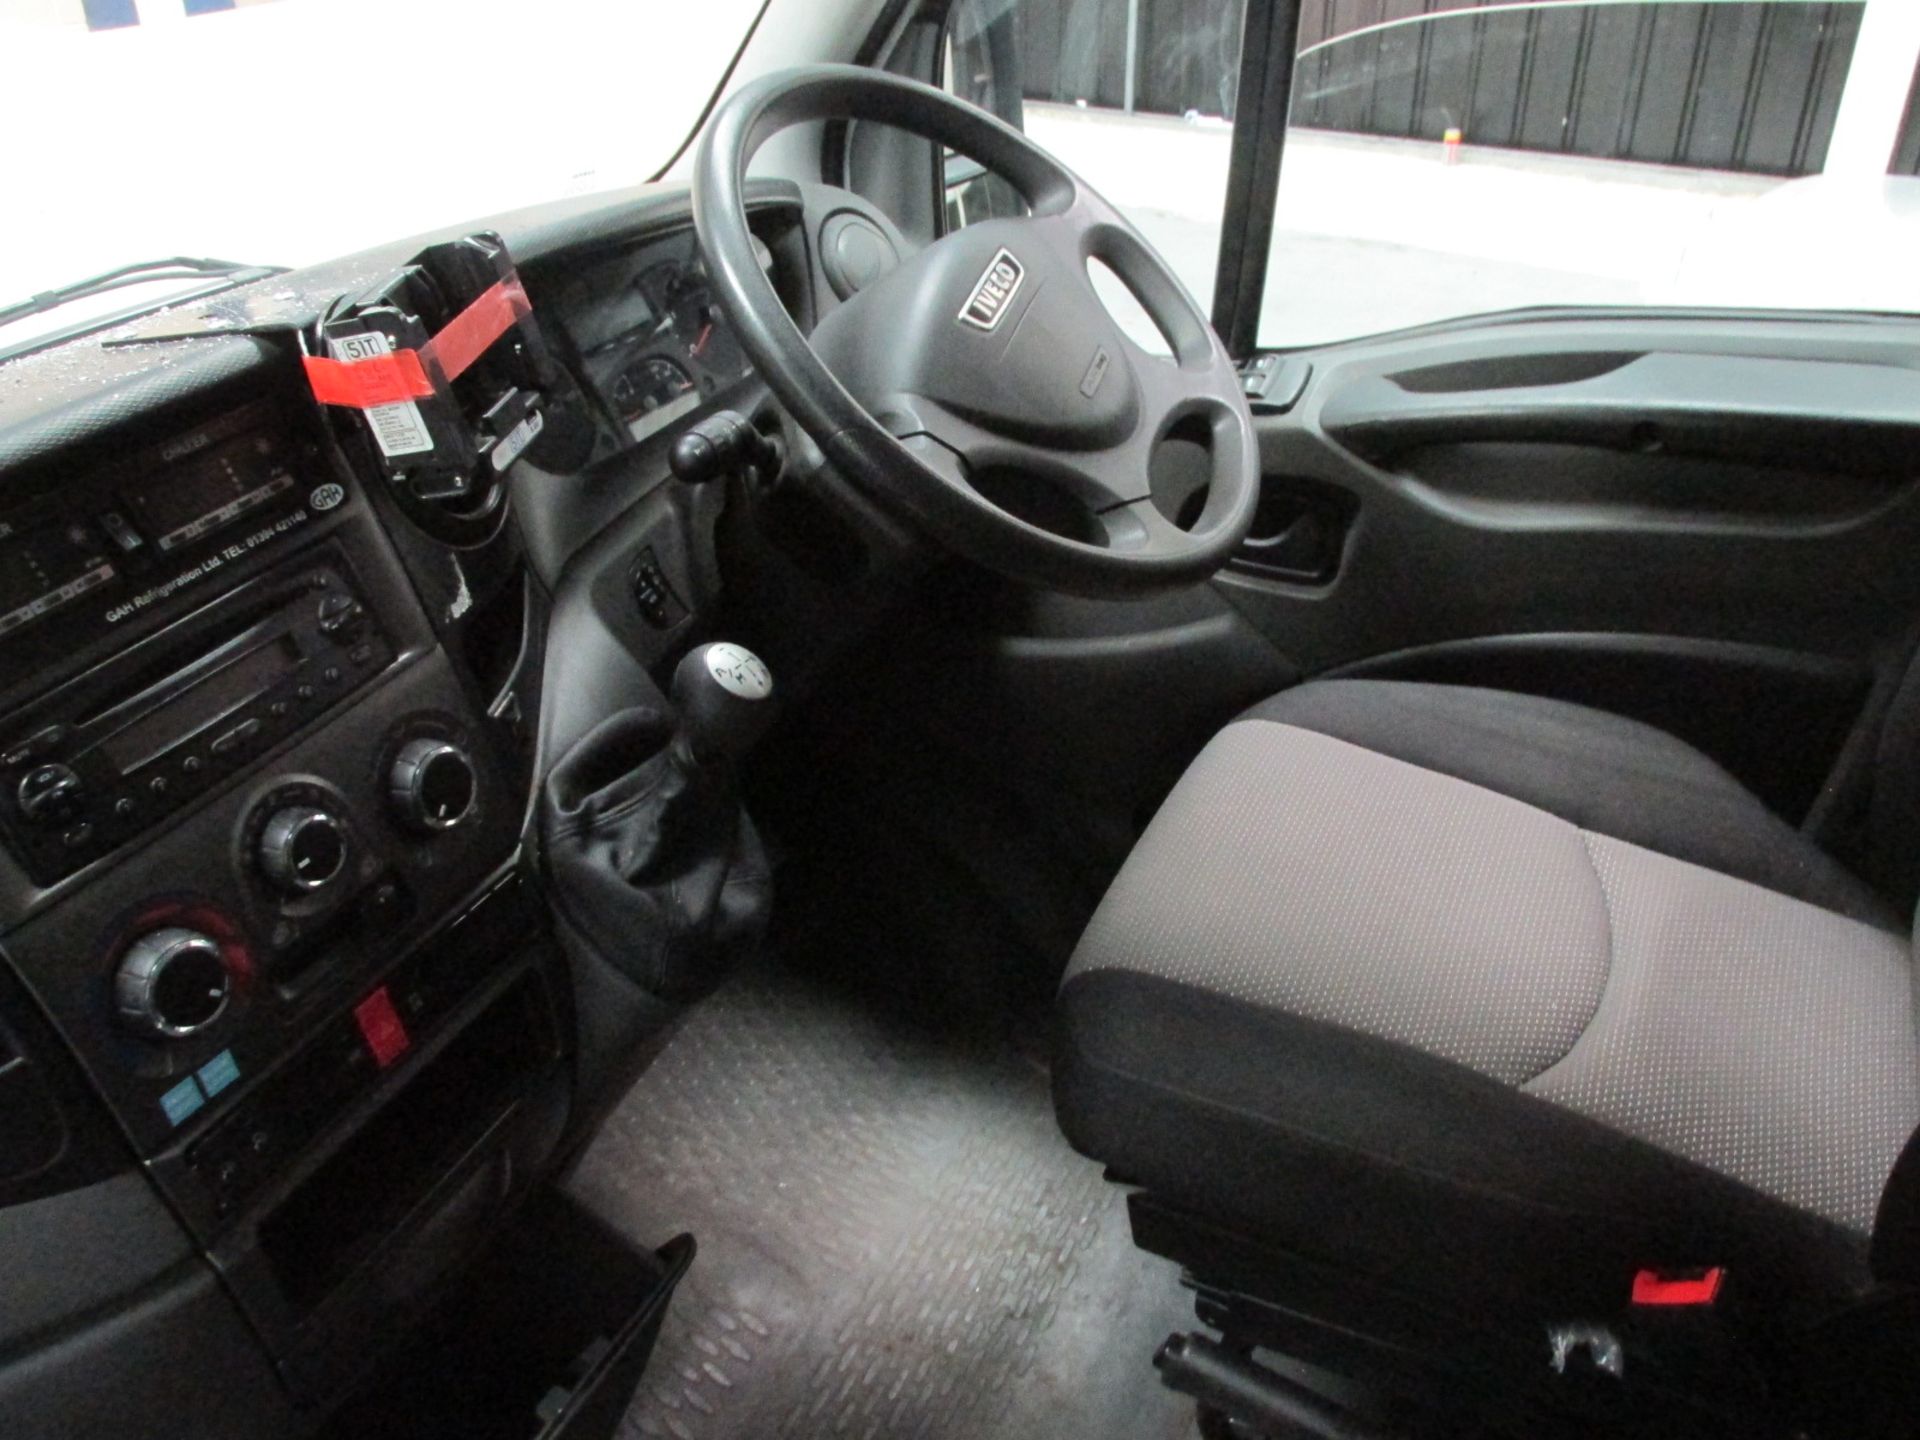 2014 Iveco Daily 35S11 3750 Wheelbase Dropside Truck - Image 7 of 9